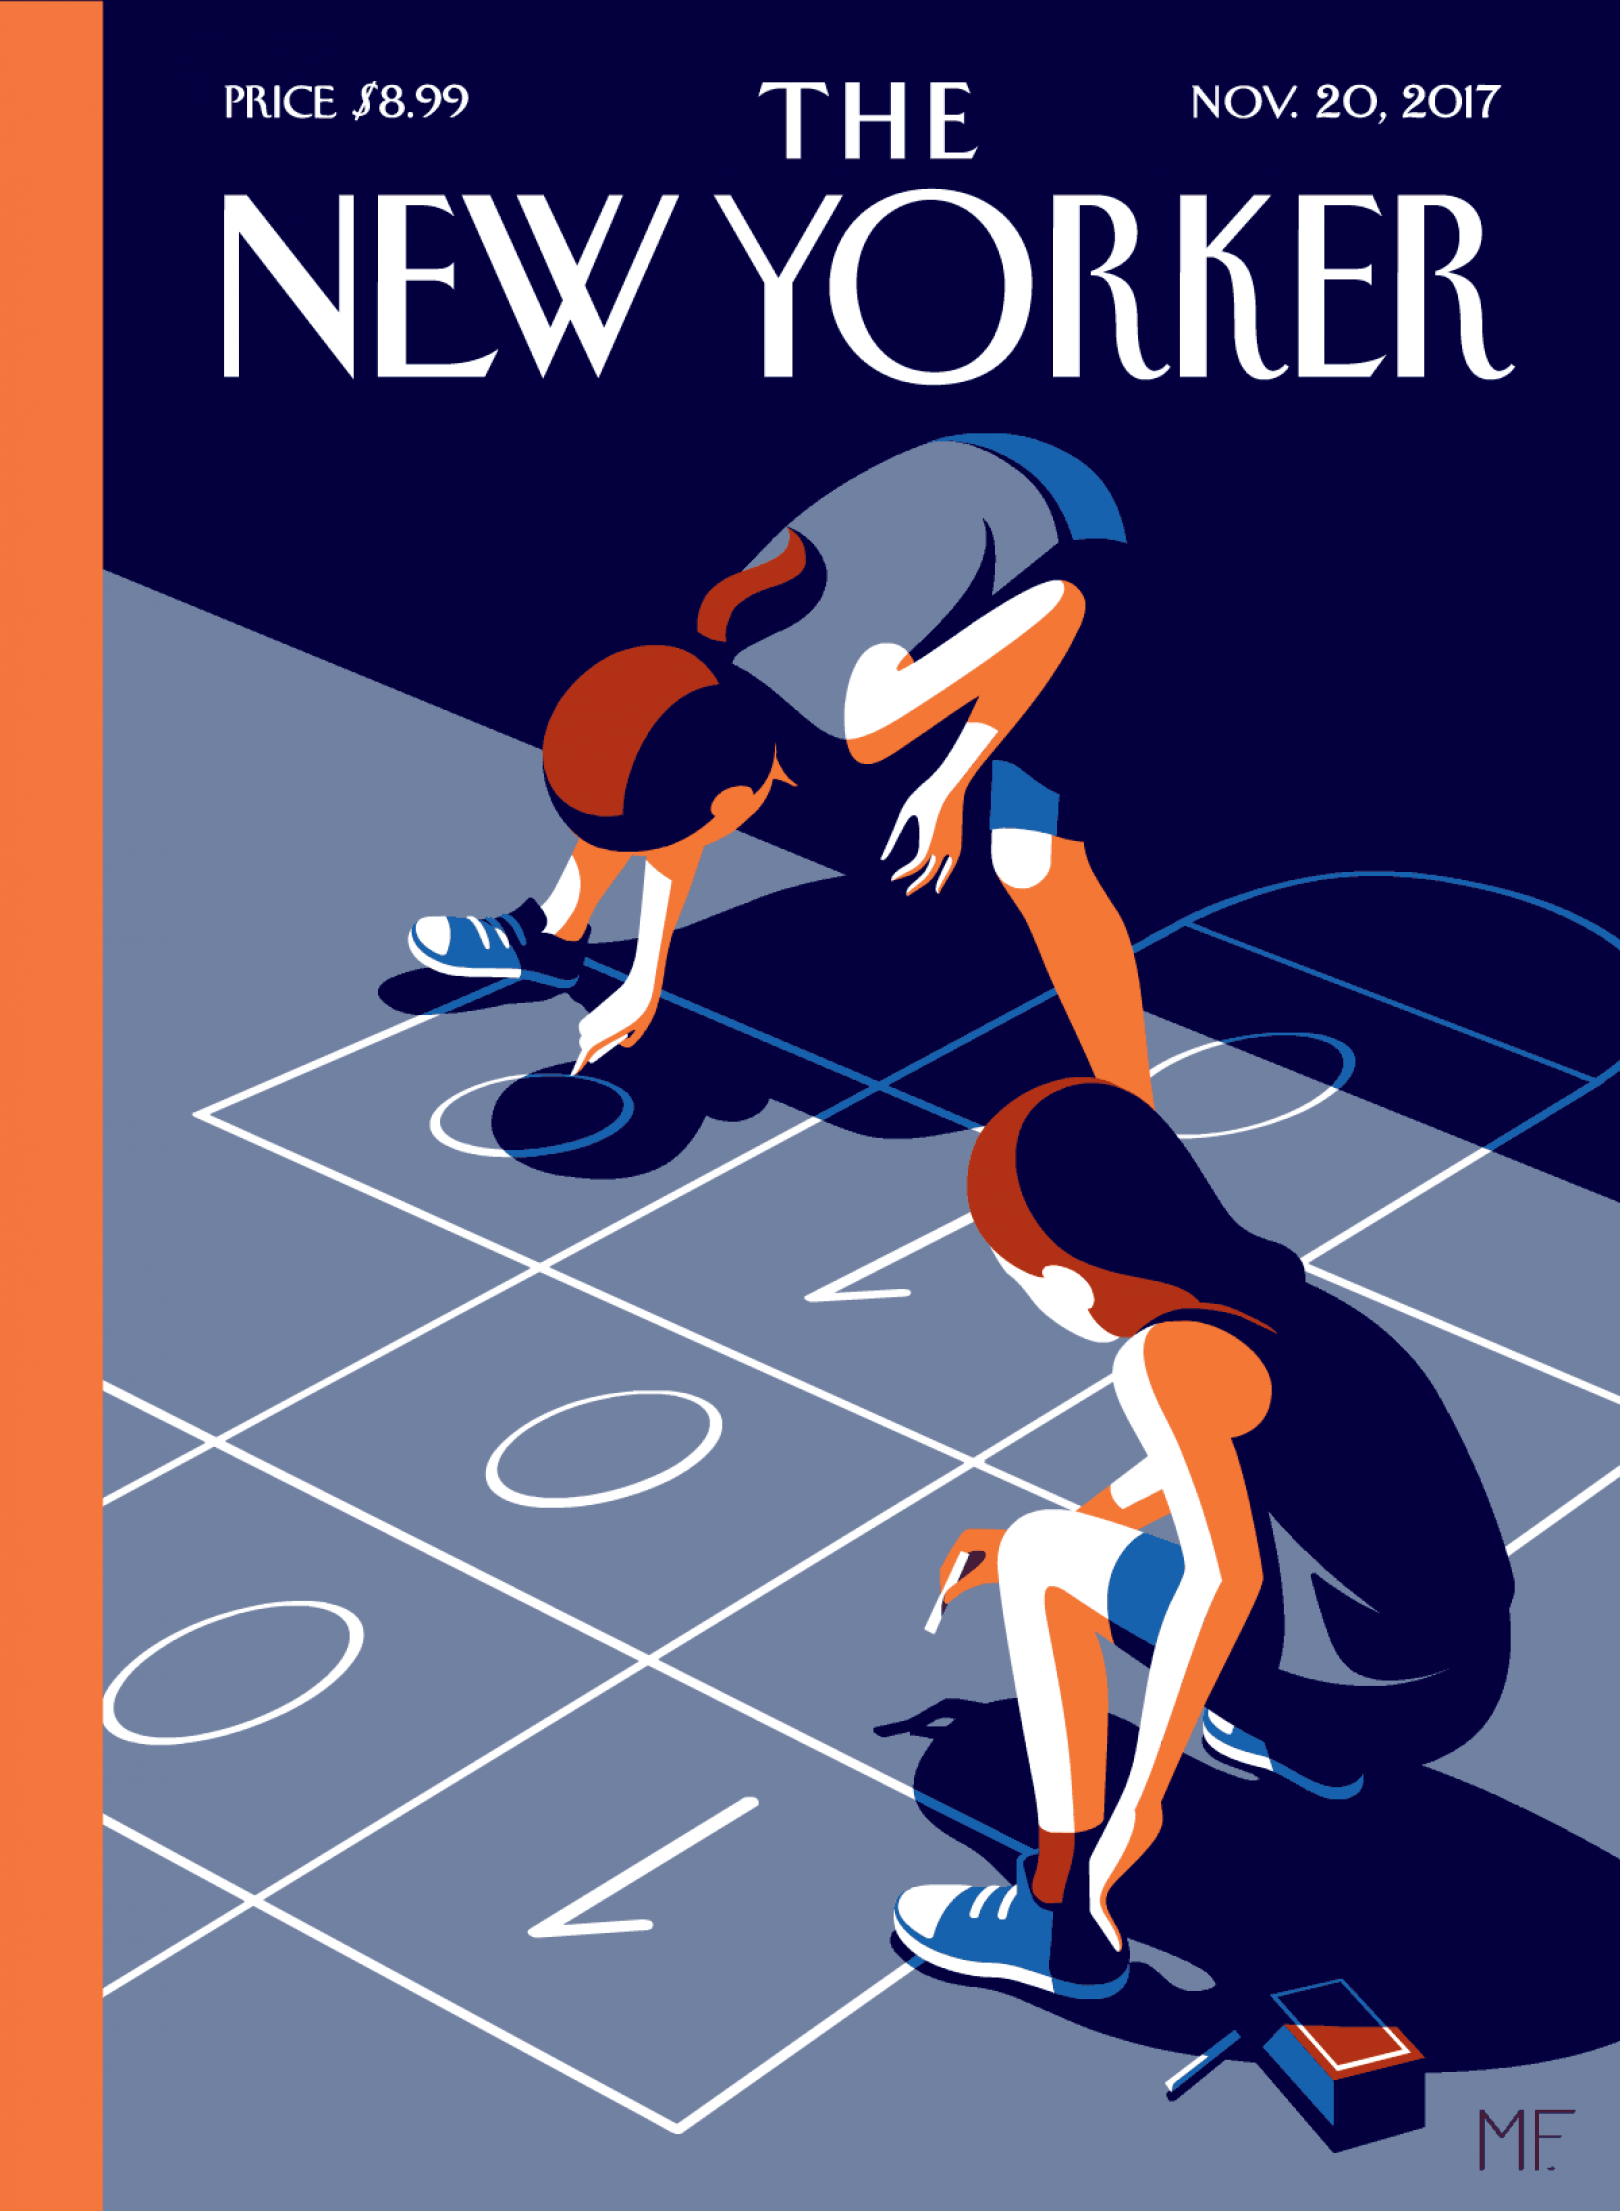 Malika Favre's latest cover for The New Yorker celebrates women in tech